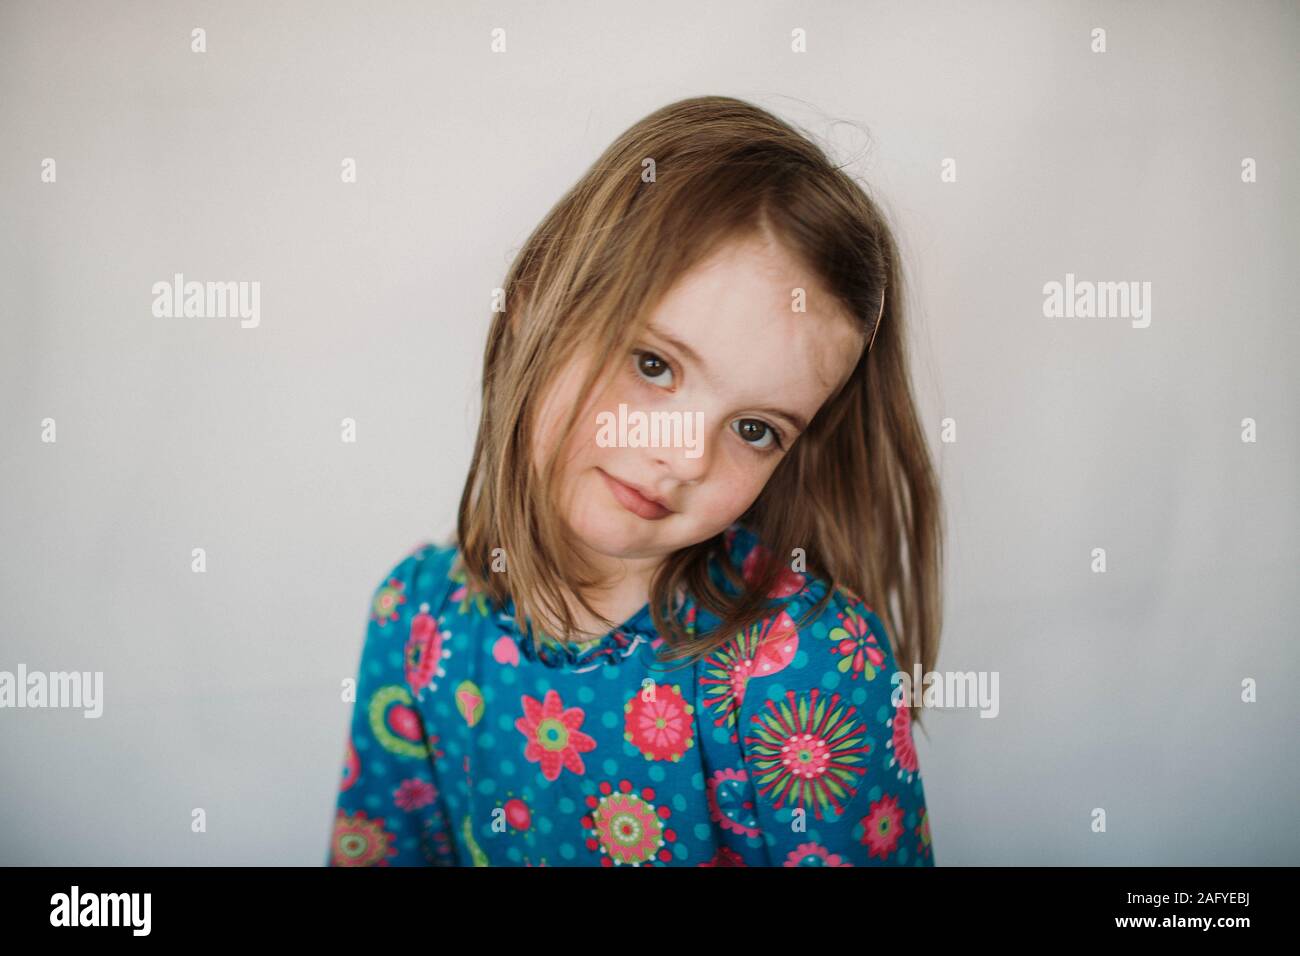 portrait of five year old girl against white background Stock Photo